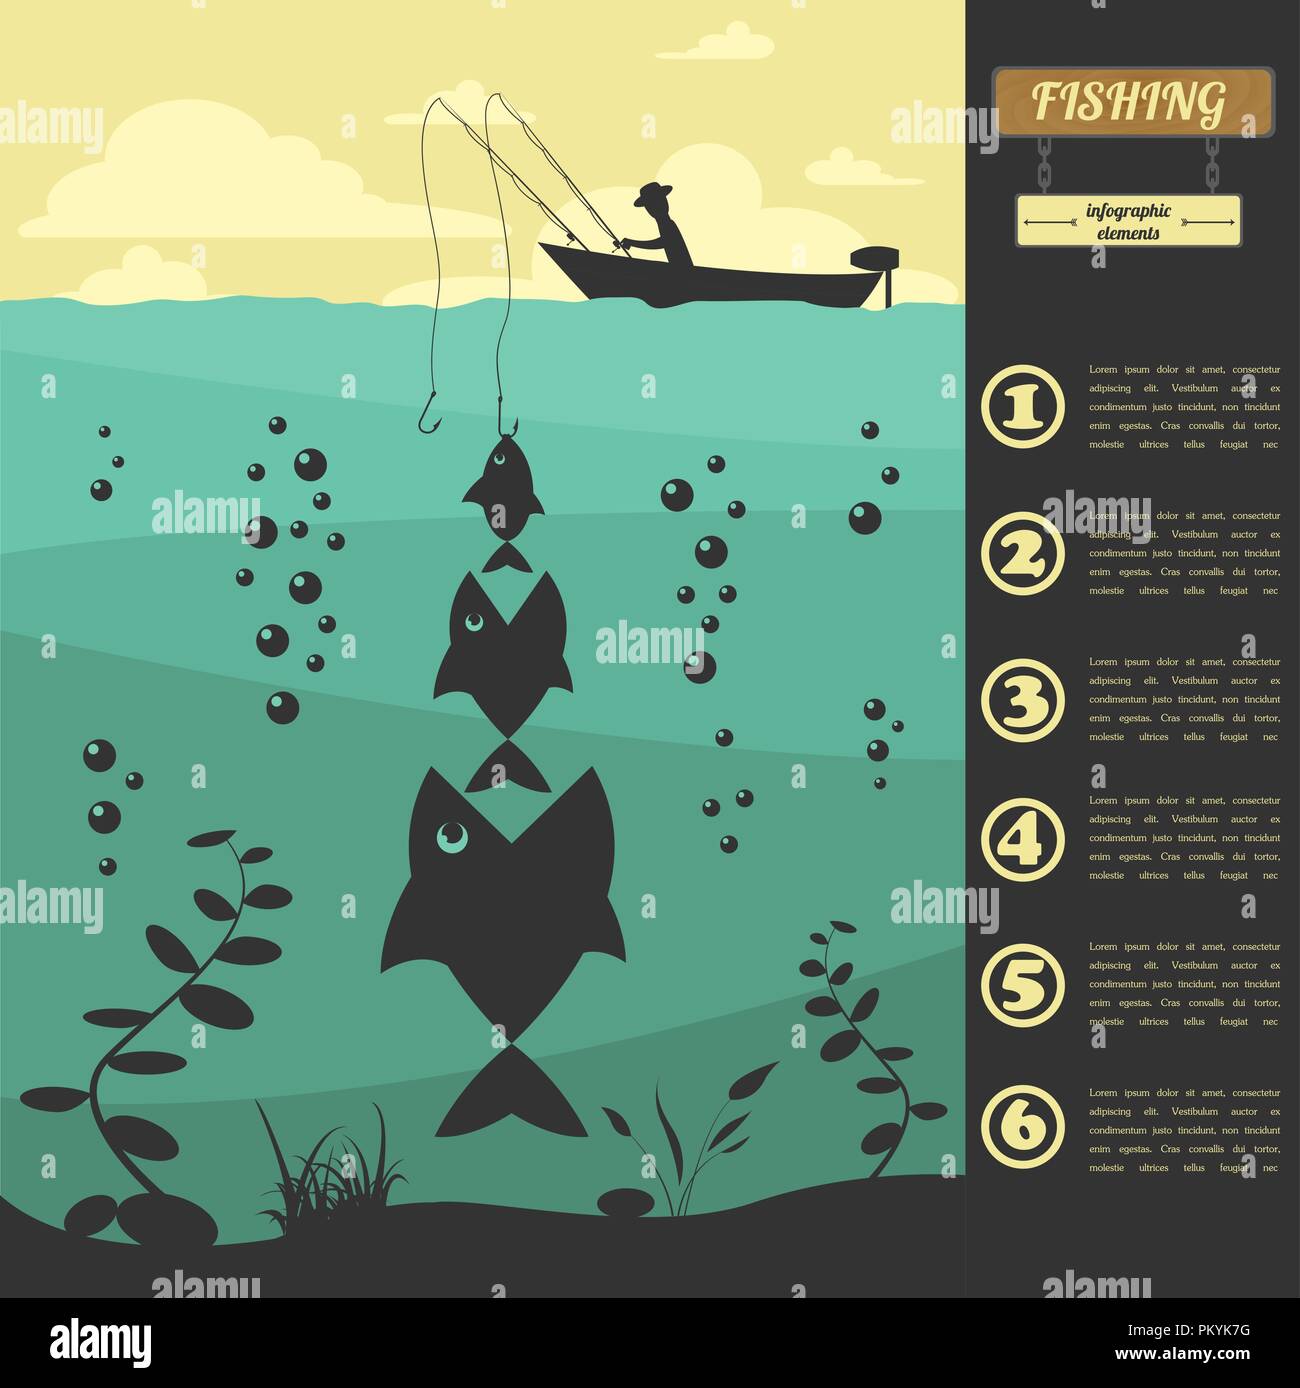 Fishing infographic elements. Set elements for creating your own infographic design. Vector illustration Stock Vector